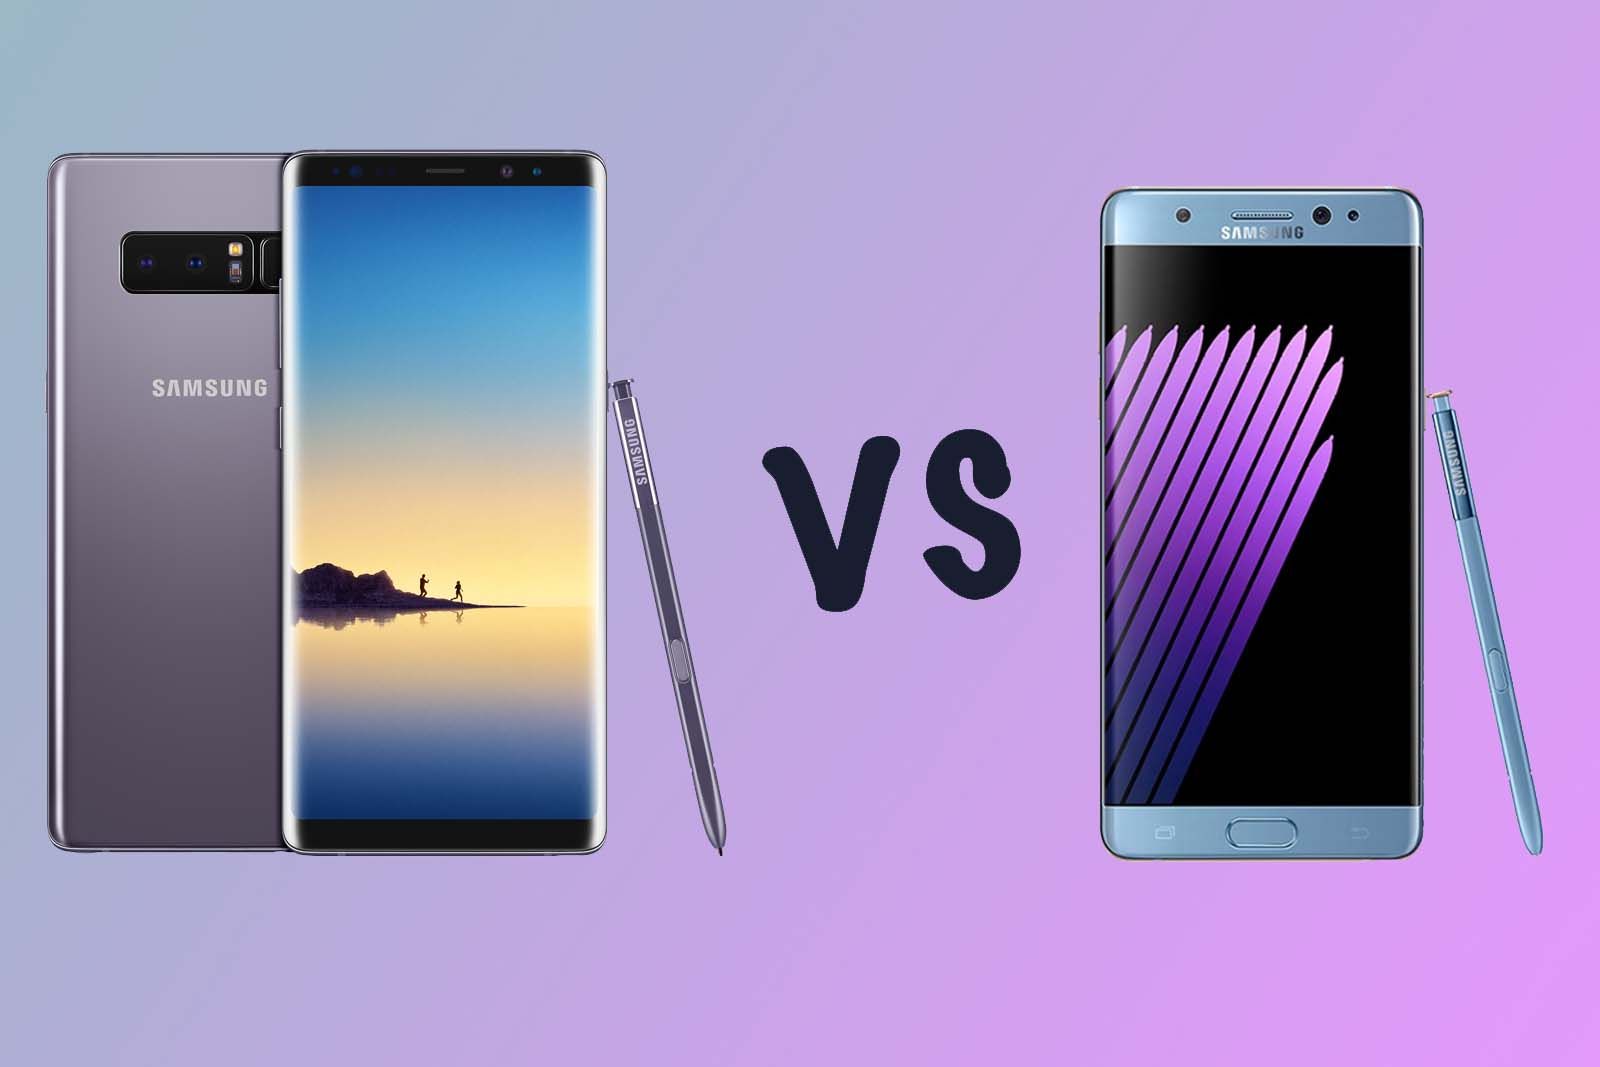 Grace chef onderzeeër Samsung Galaxy Note 8 vs Galaxy Note 7: What's the difference?